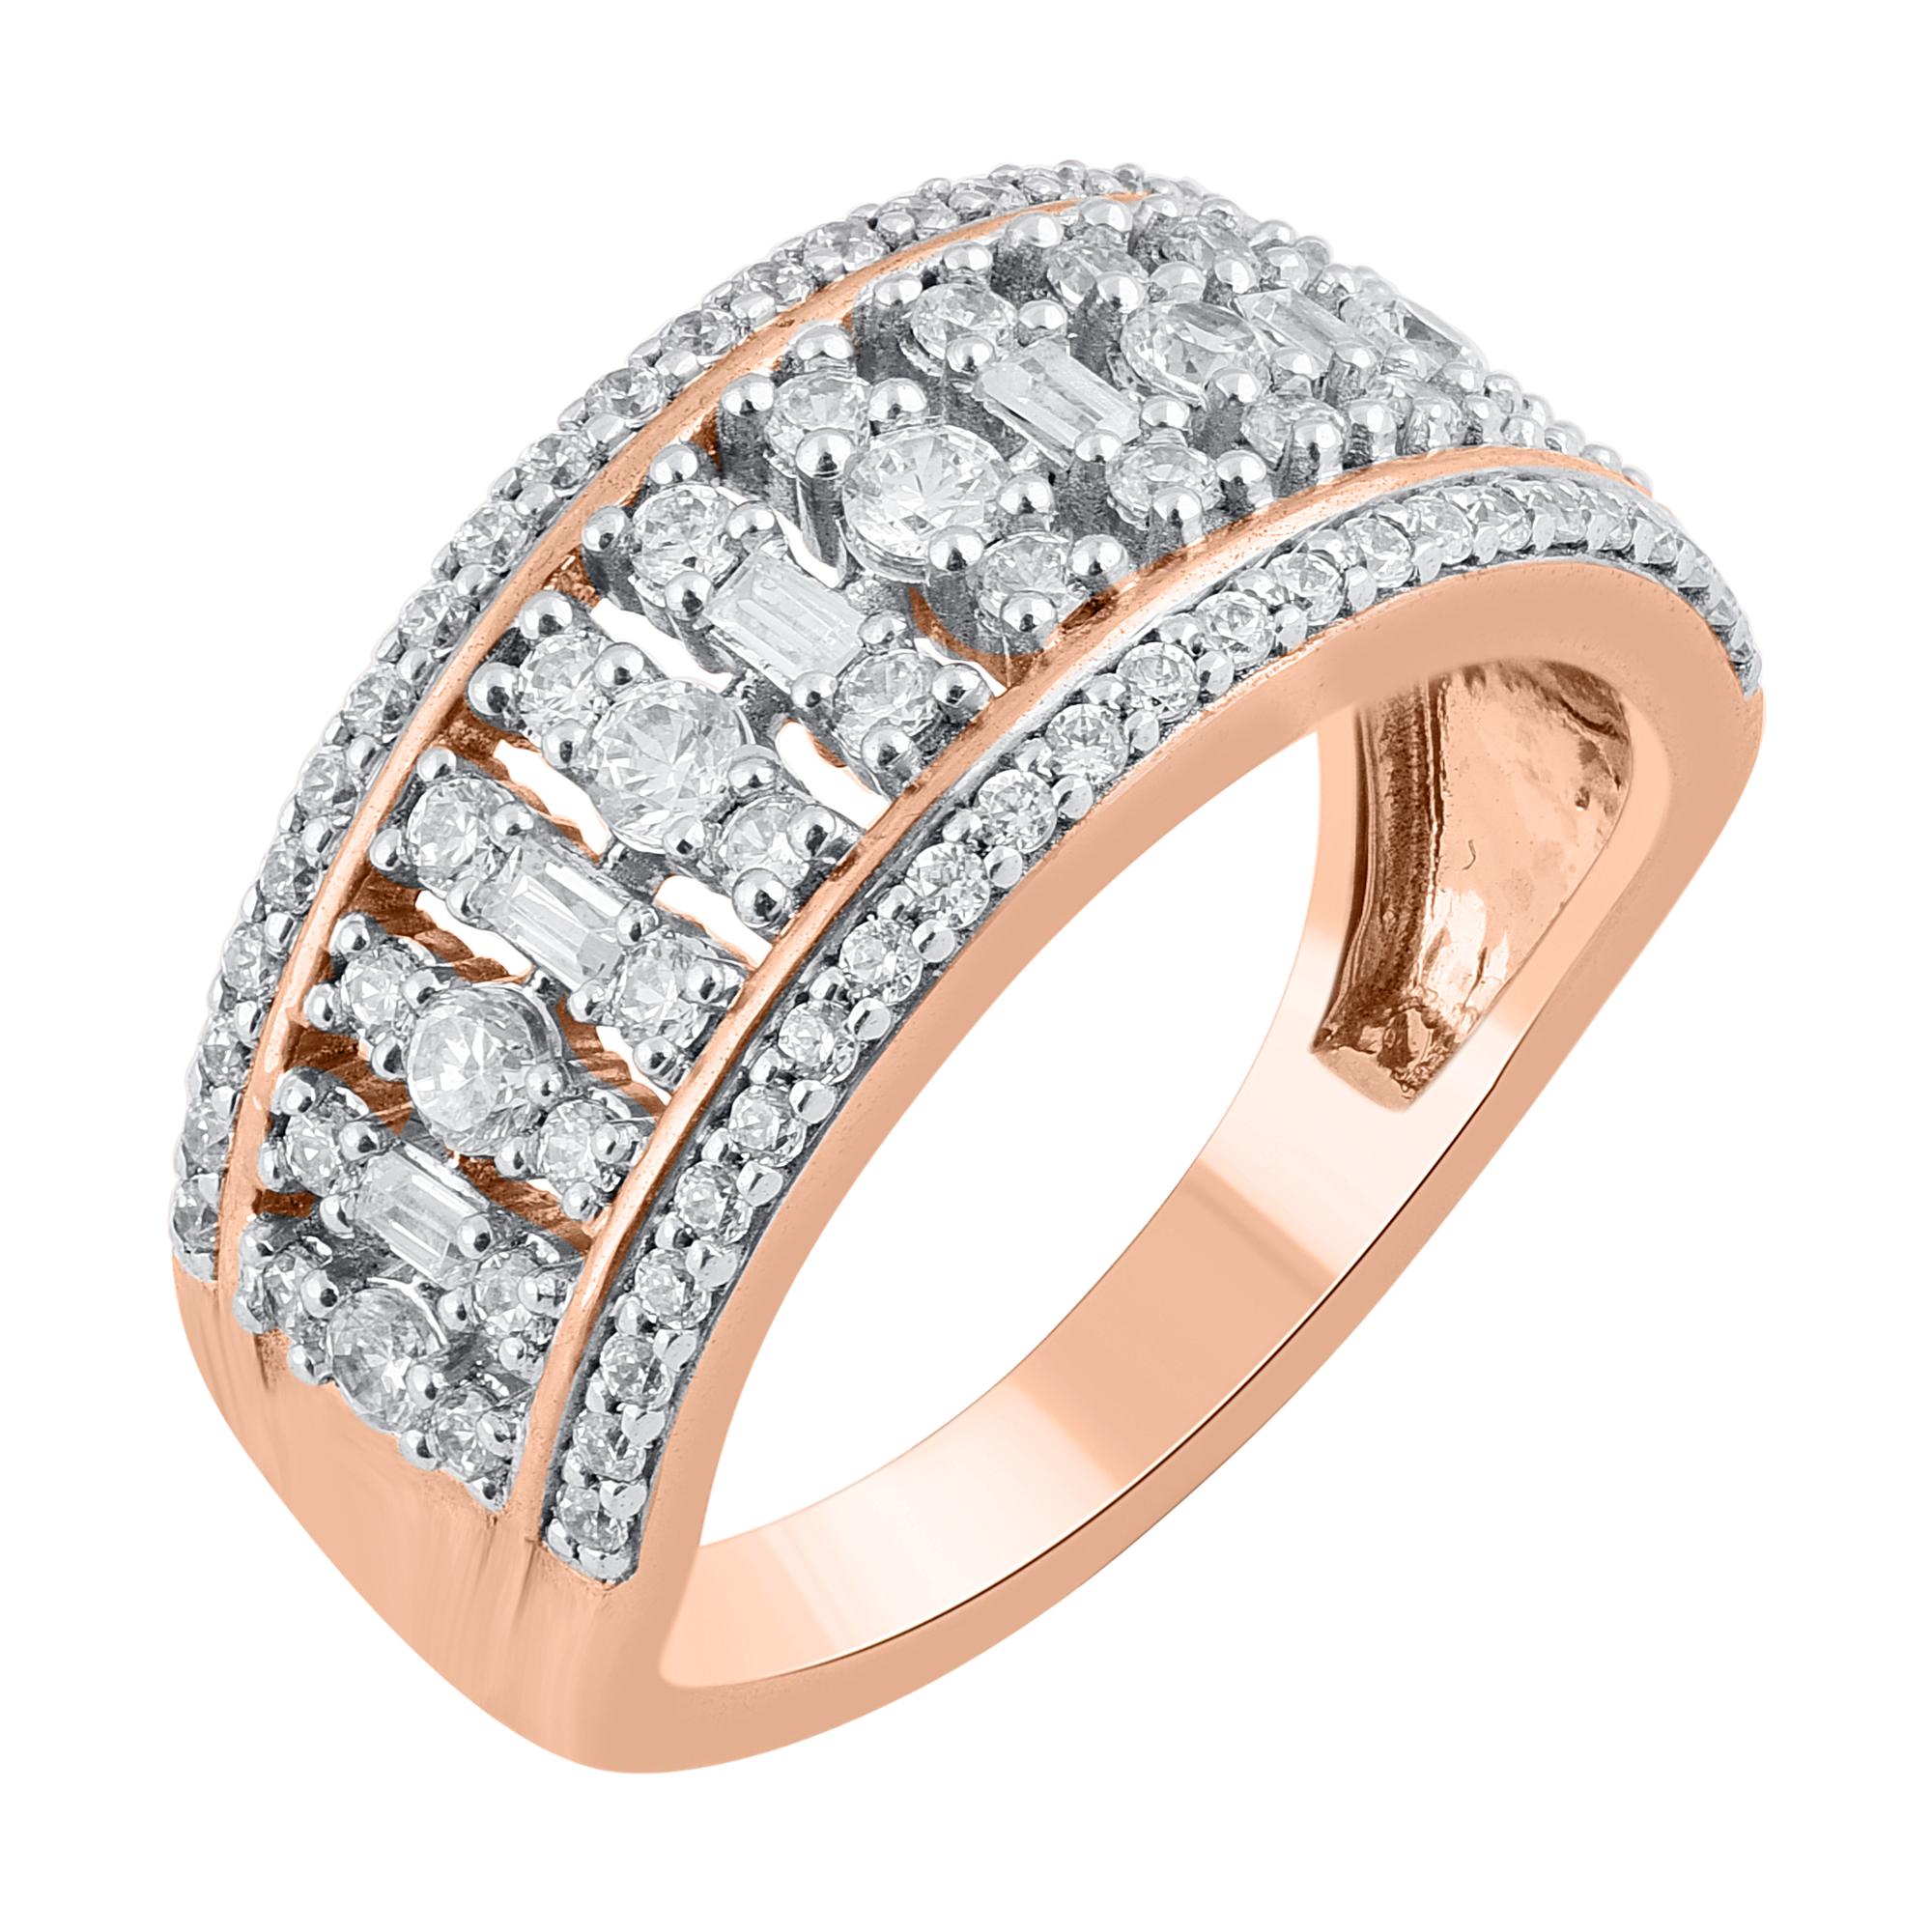 Make this year one to remember with the rows of sparkle in this round and baguette diamond wedding band. These band ring are studded with 85 natural diamonds in 14KT rose gold in prong setting. The white diamonds are graded as H-I color and I-2